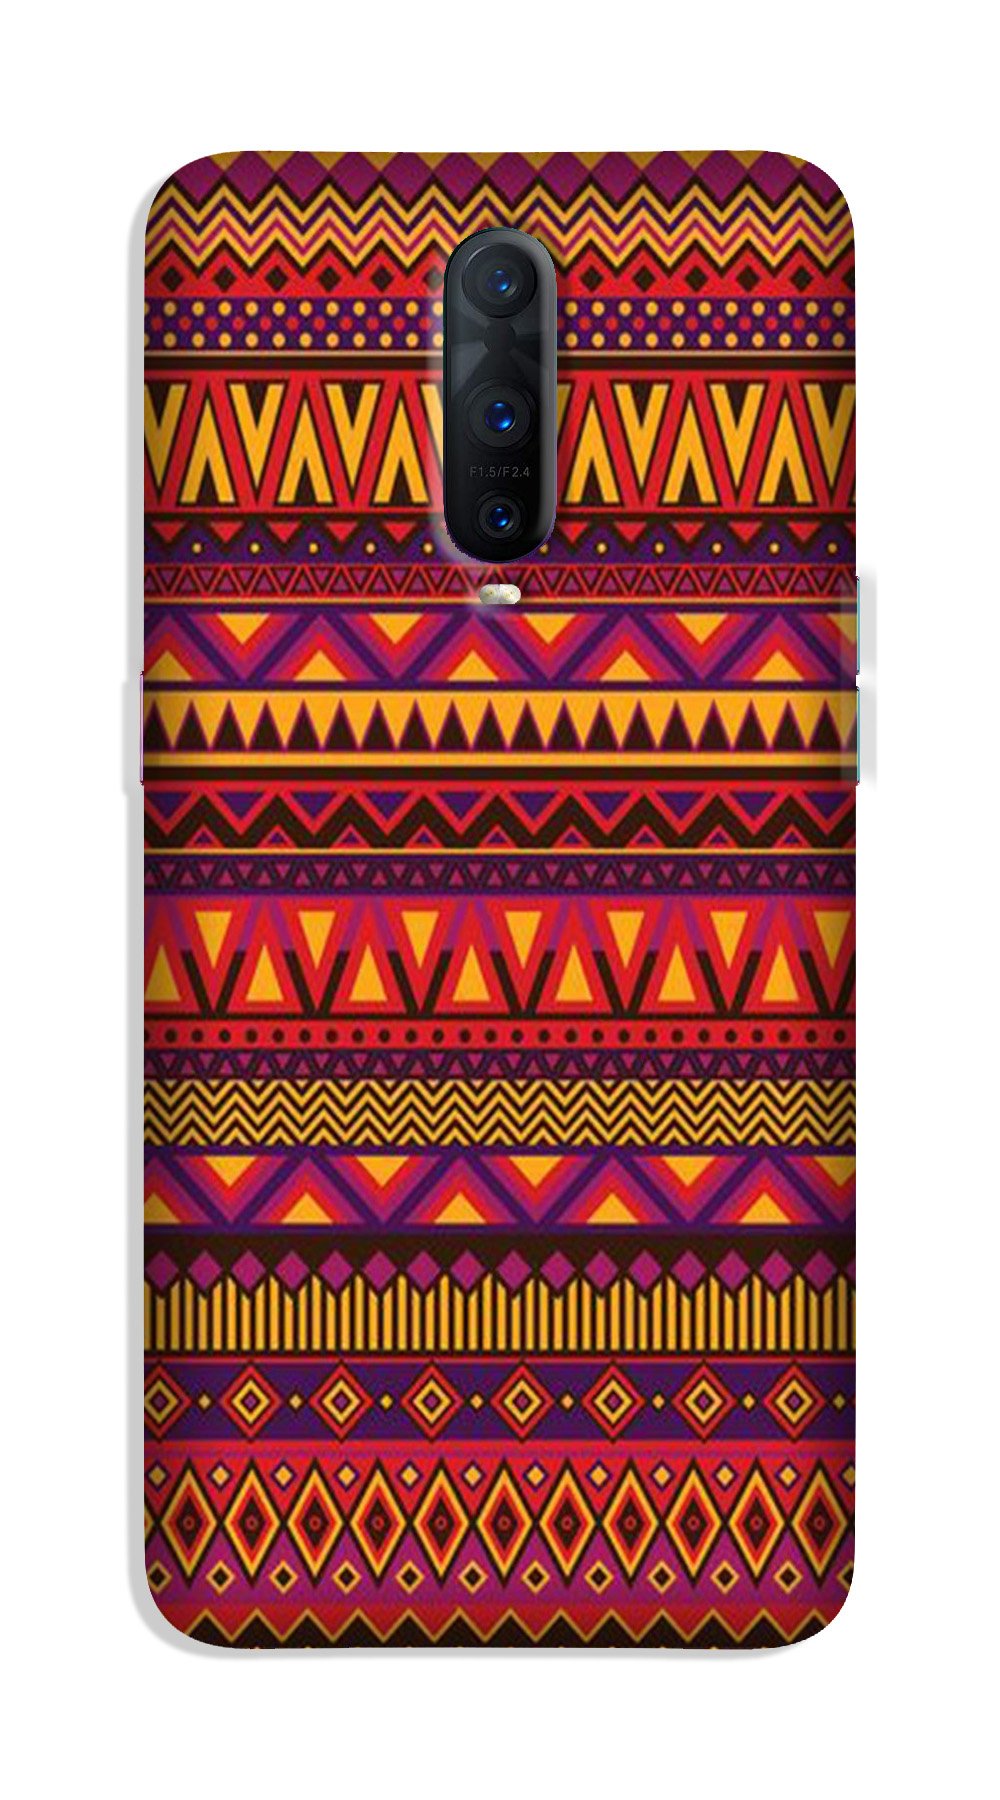 Zigzag line pattern2 Case for OnePlus 7 Pro